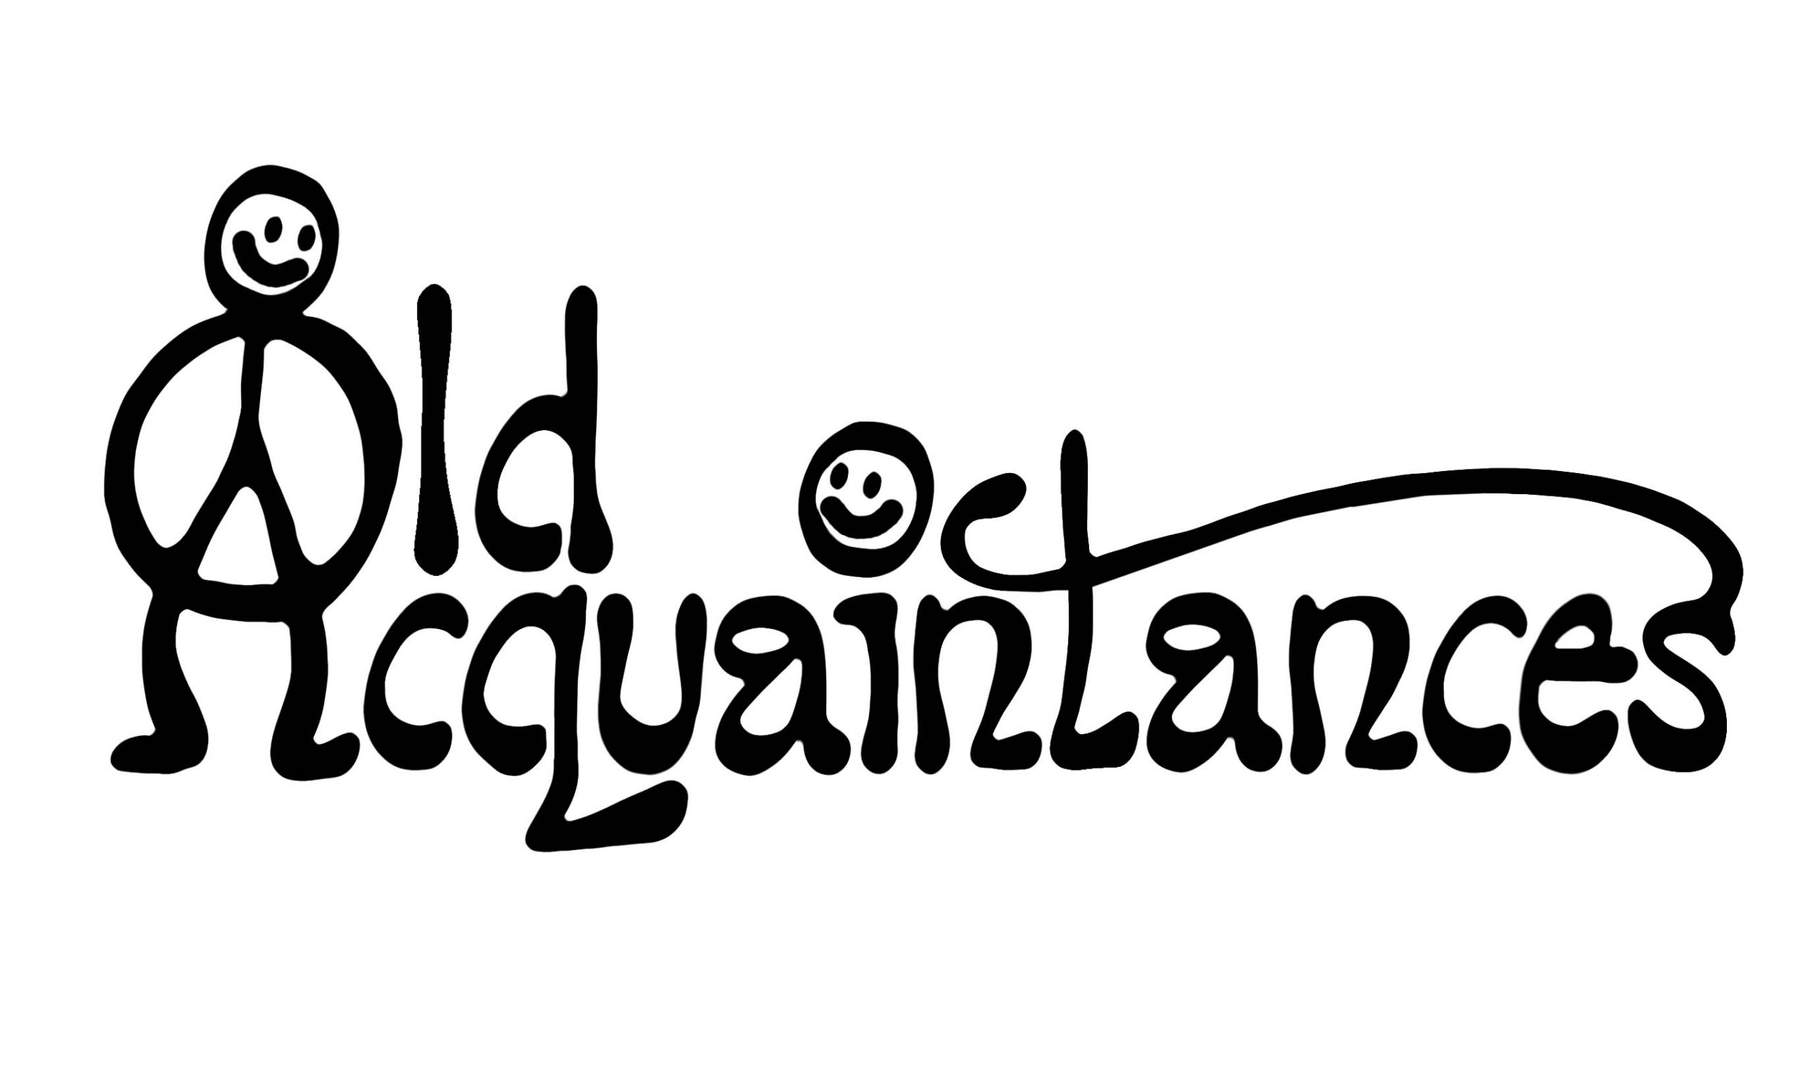 oldacquantances_logotype-min-scaled-1.jpg?time=1666883527